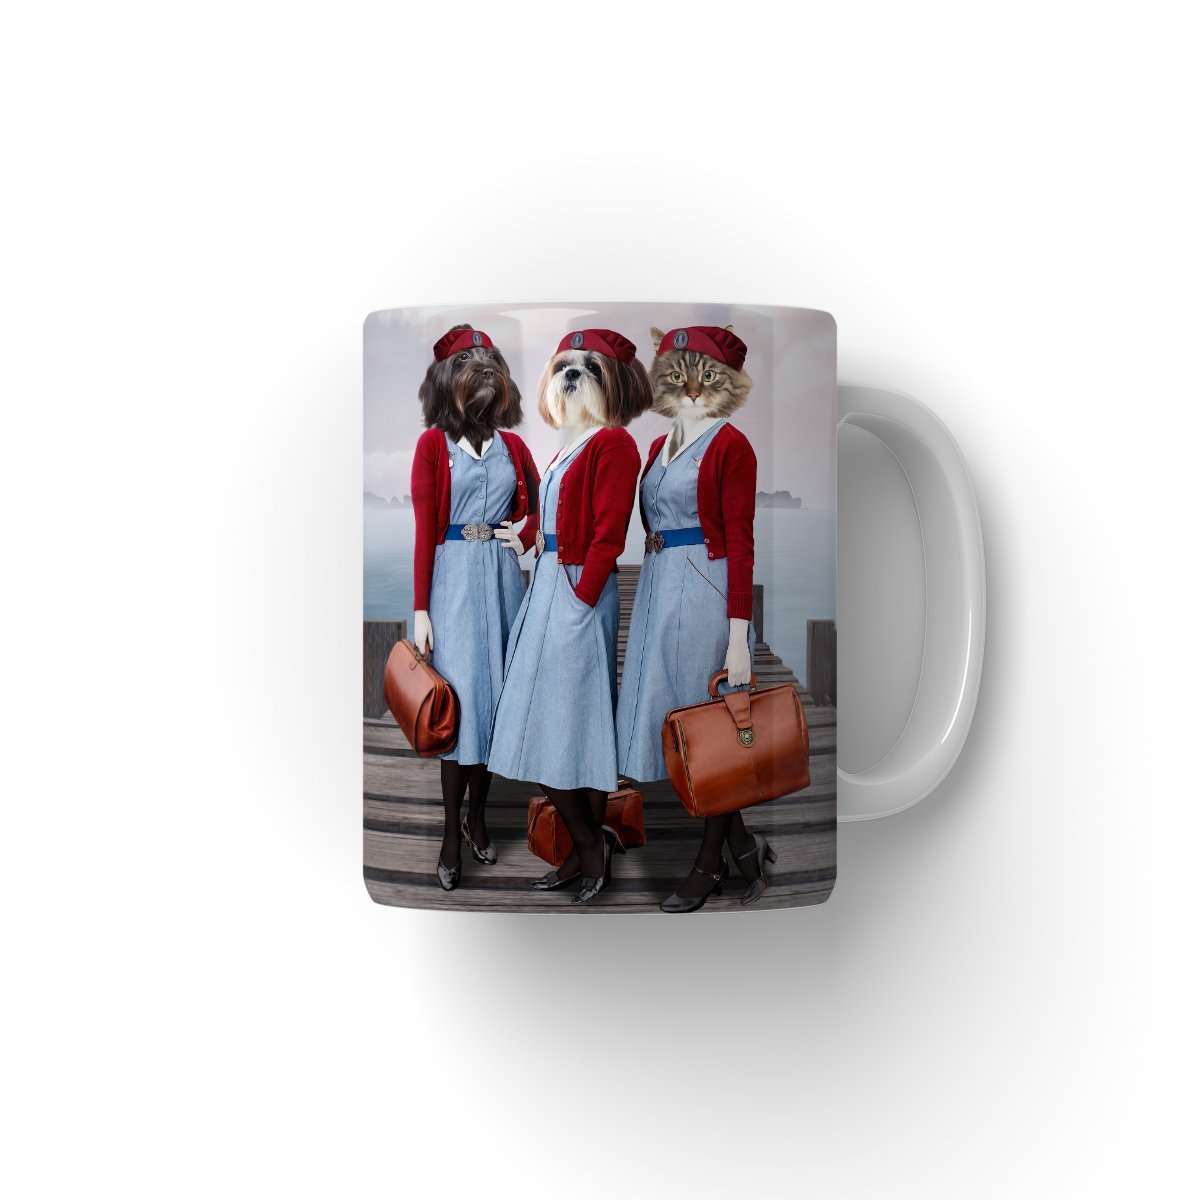 The Midwifes (Call The Midwife Inspired): Custom Pet Mug - Paw & Glory - #pet portraits# - #dog portraits# - #pet portraits uk#paw & glory, custom pet portrait Mug,dog coffee mug custom, personalized coffee mugs with pets, coffee mug with dogs, mug with dogs face on it, personalised mugs dogs